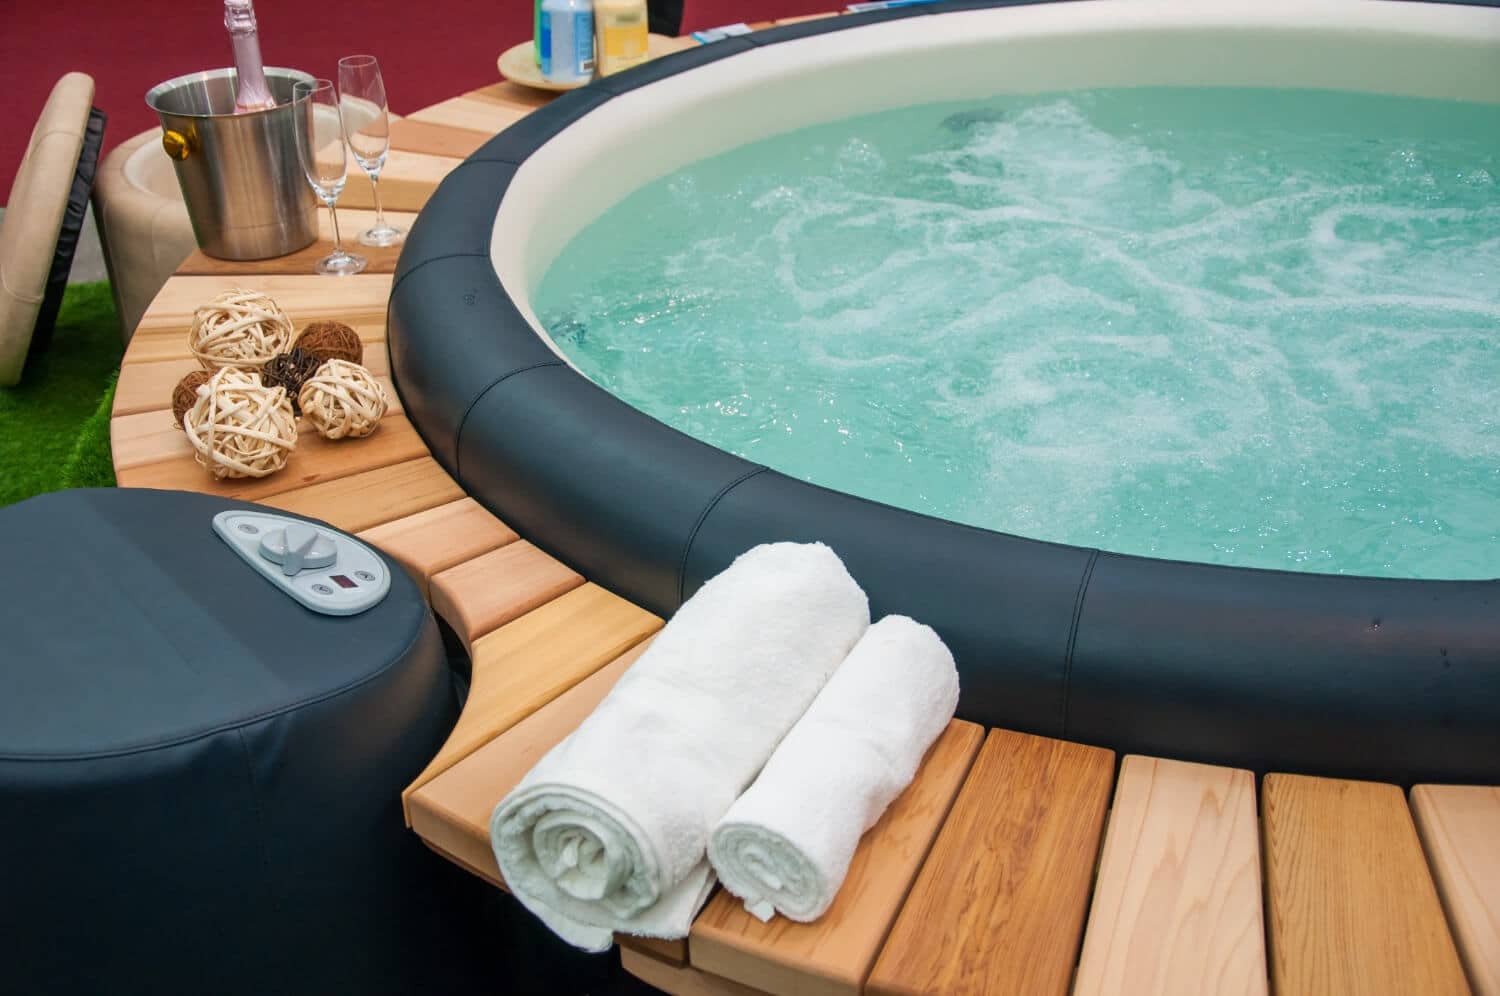 Accessories to enhance your hot tub experience